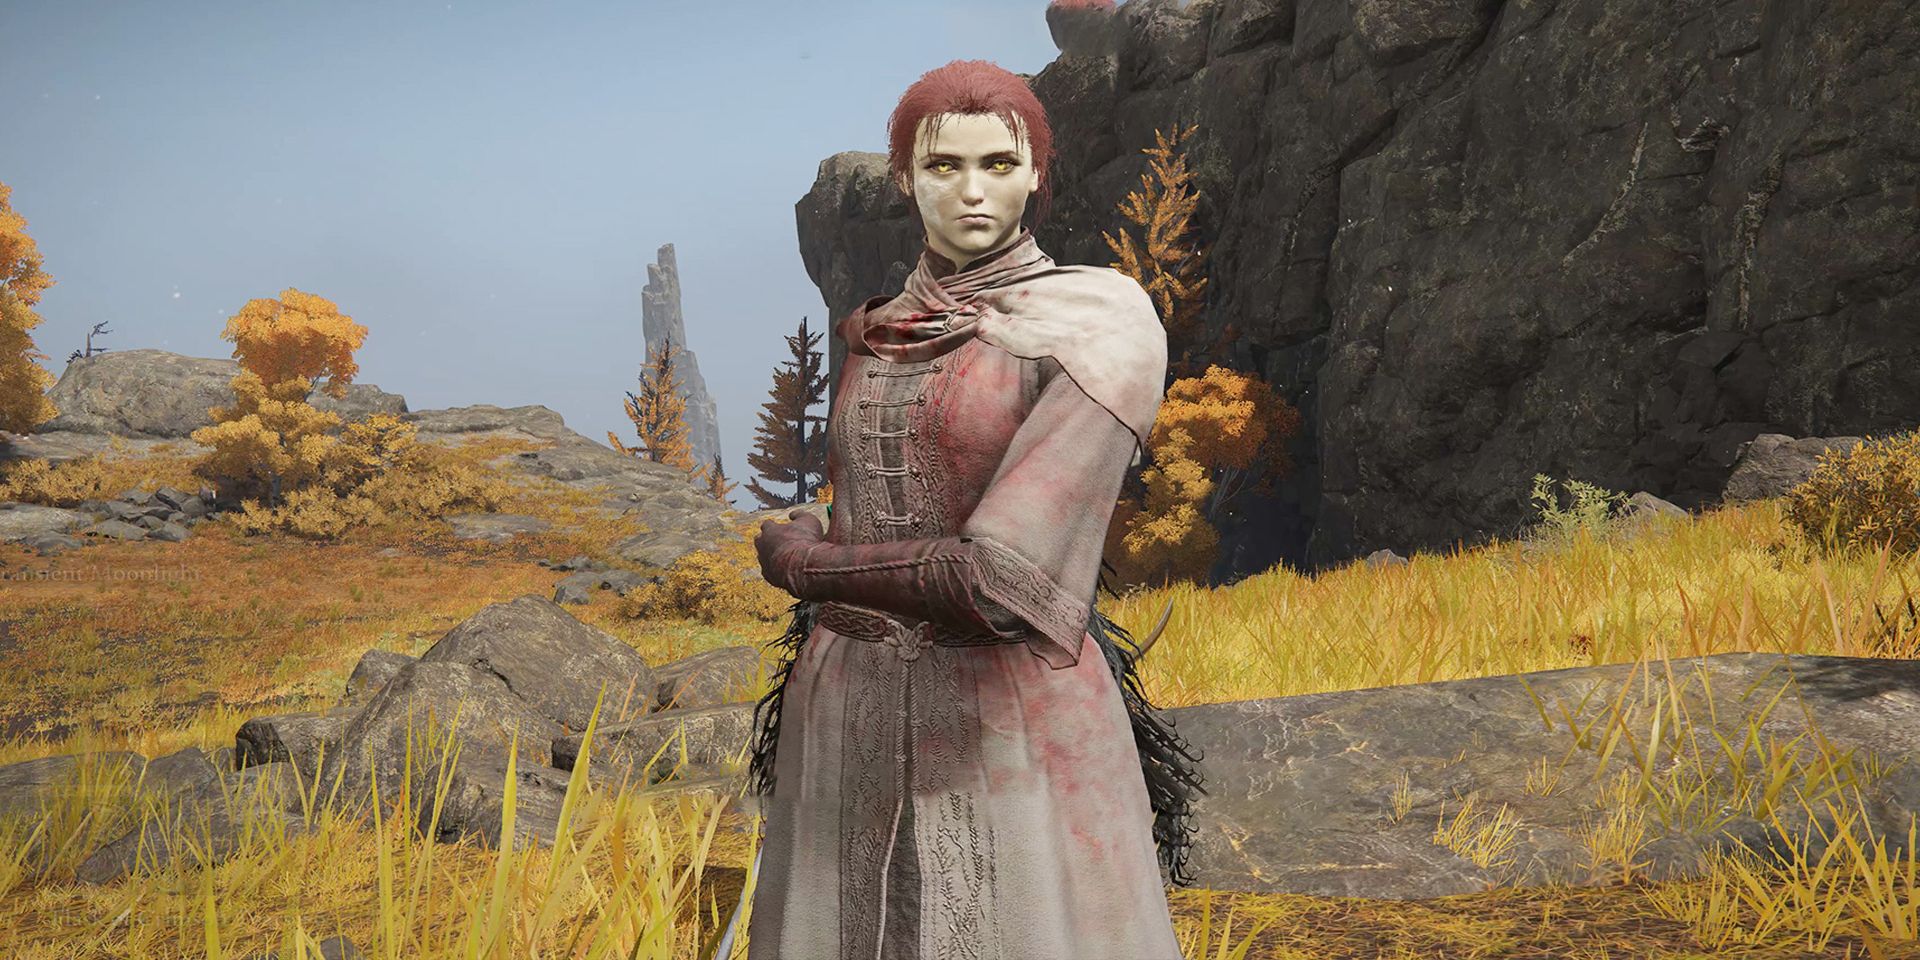 Millicent, an NPC encountered in the video game Elden Ring.